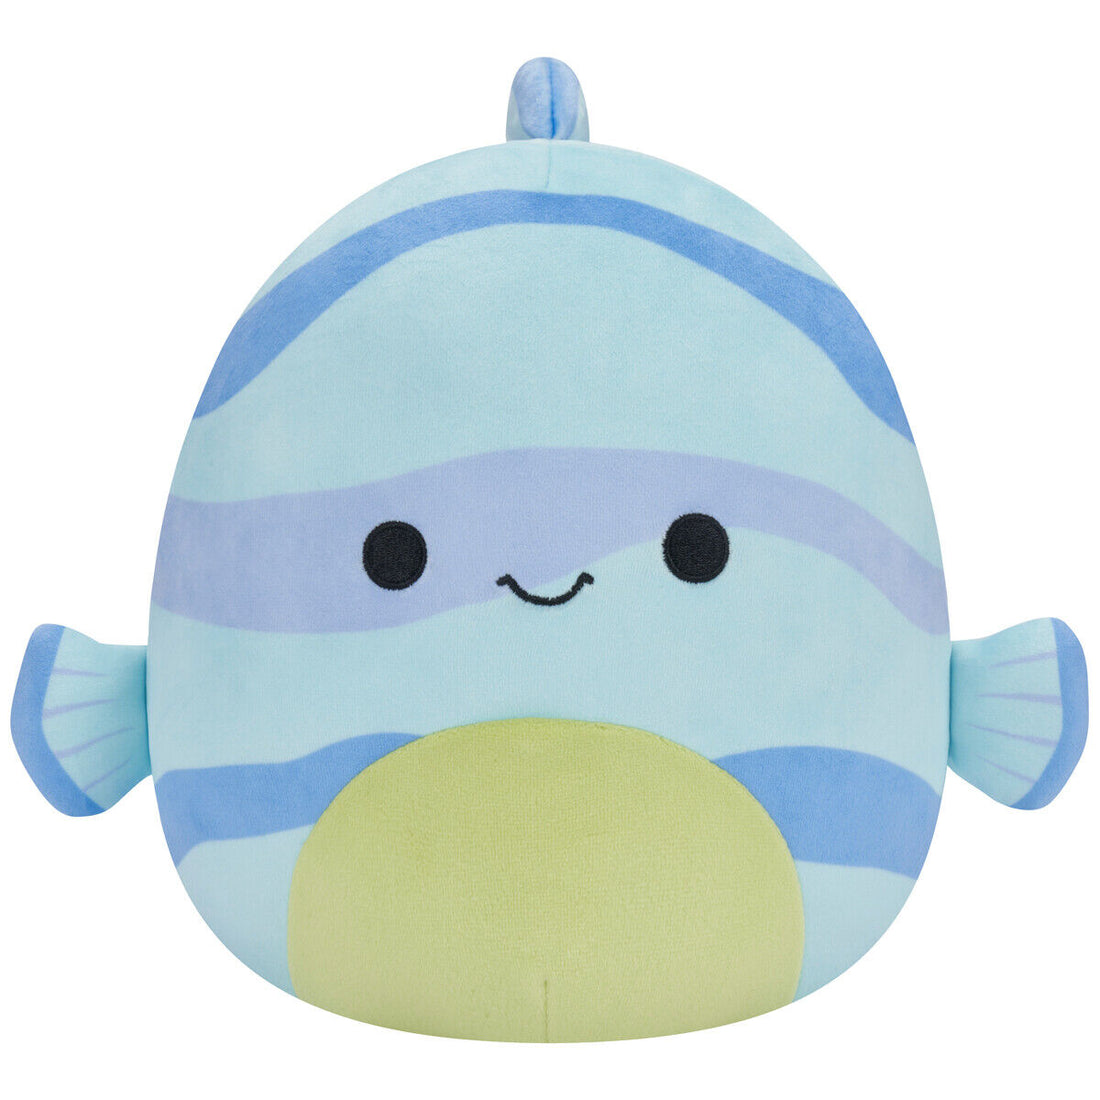 Squishmallows Squishmallow 7.5-Inch SOFT CUDDLE Toy Cute Animal Pillow Kid GIFT - LELAND